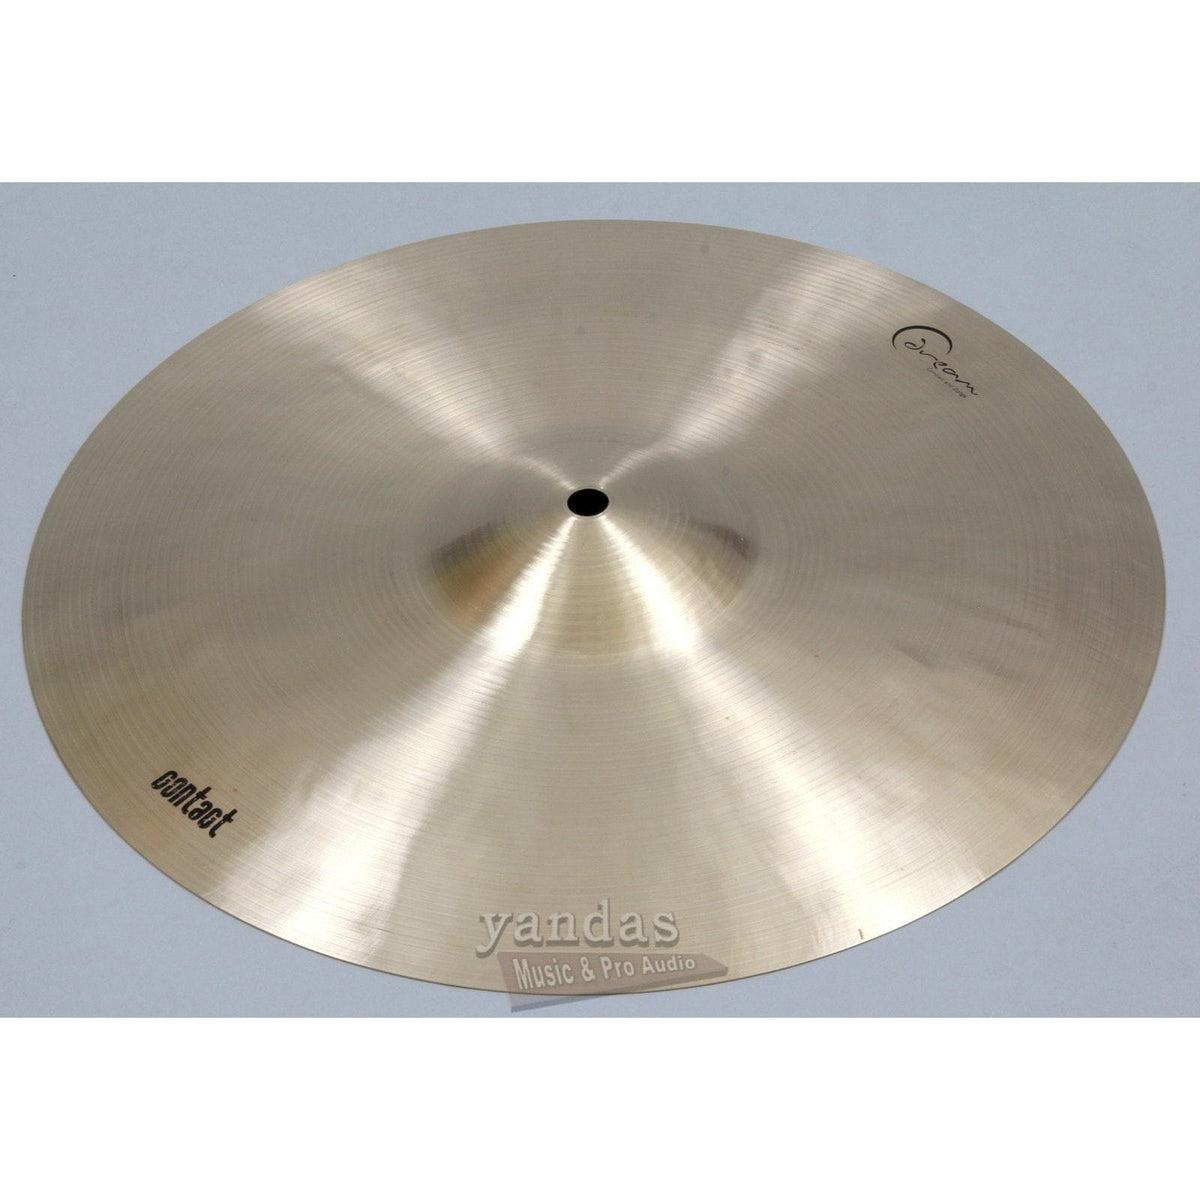 Dream Cymbals Contact Crash Cymbal 14 Inch